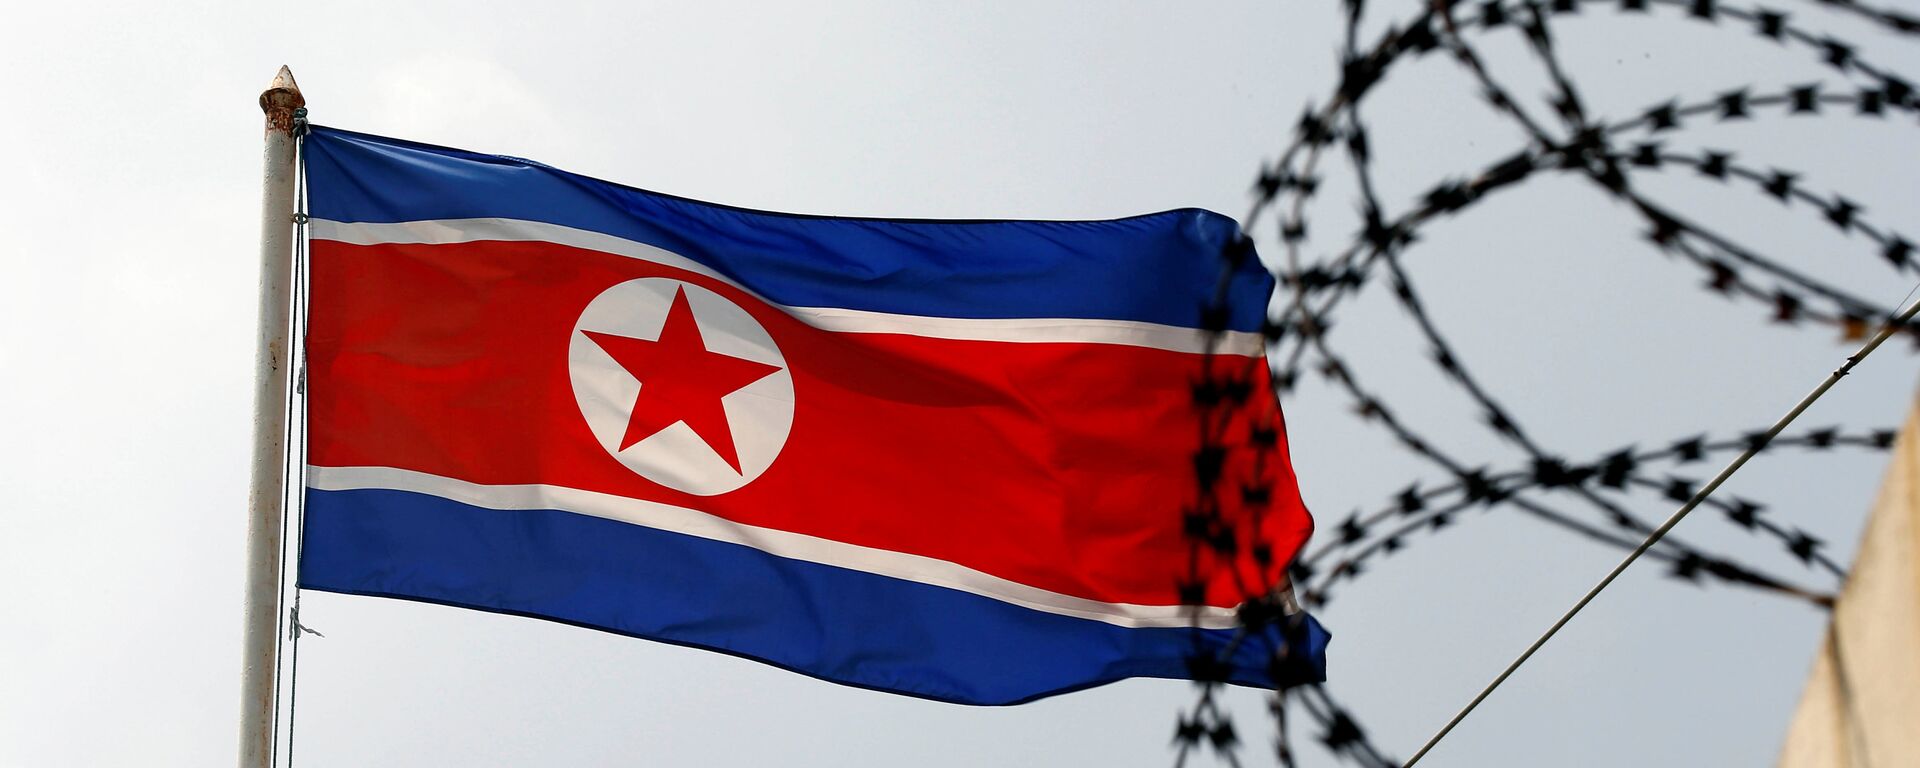 The North Korea flag flutters next to concertina wire at the North Korean embassy in Kuala Lumpur, Malaysia March 9, 2017 - Sputnik Mundo, 1920, 21.10.2021